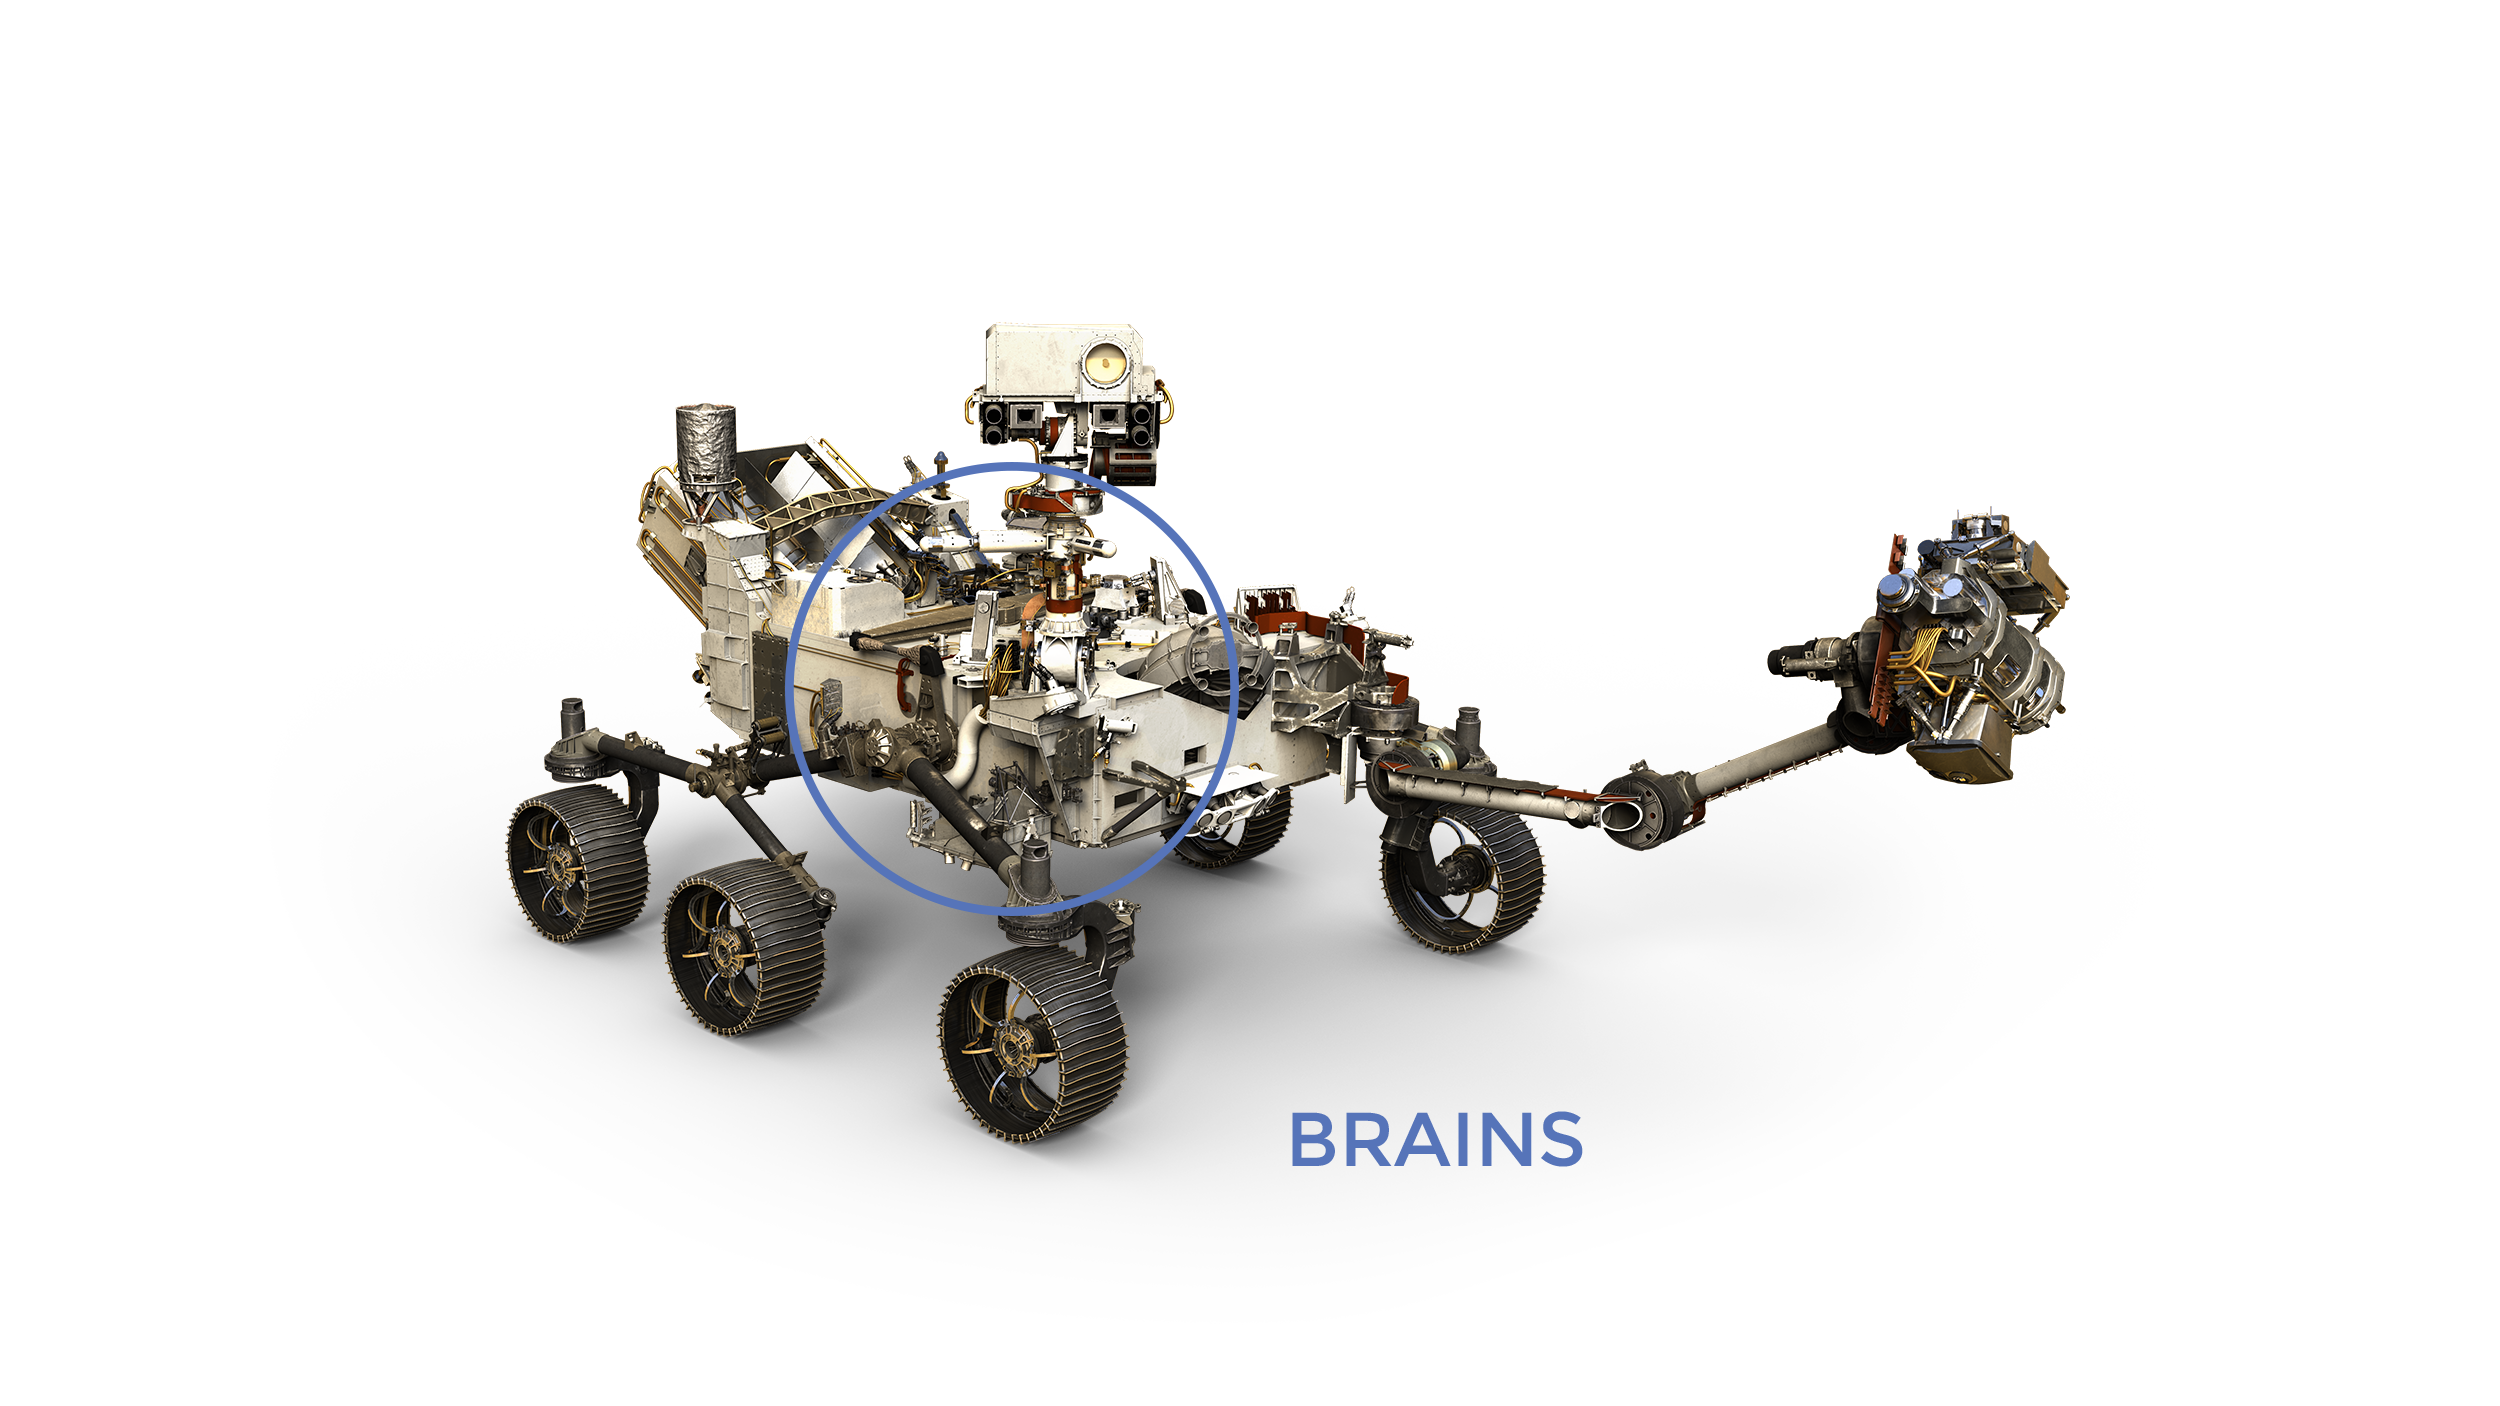 Perseverance Rover brains labeled on model